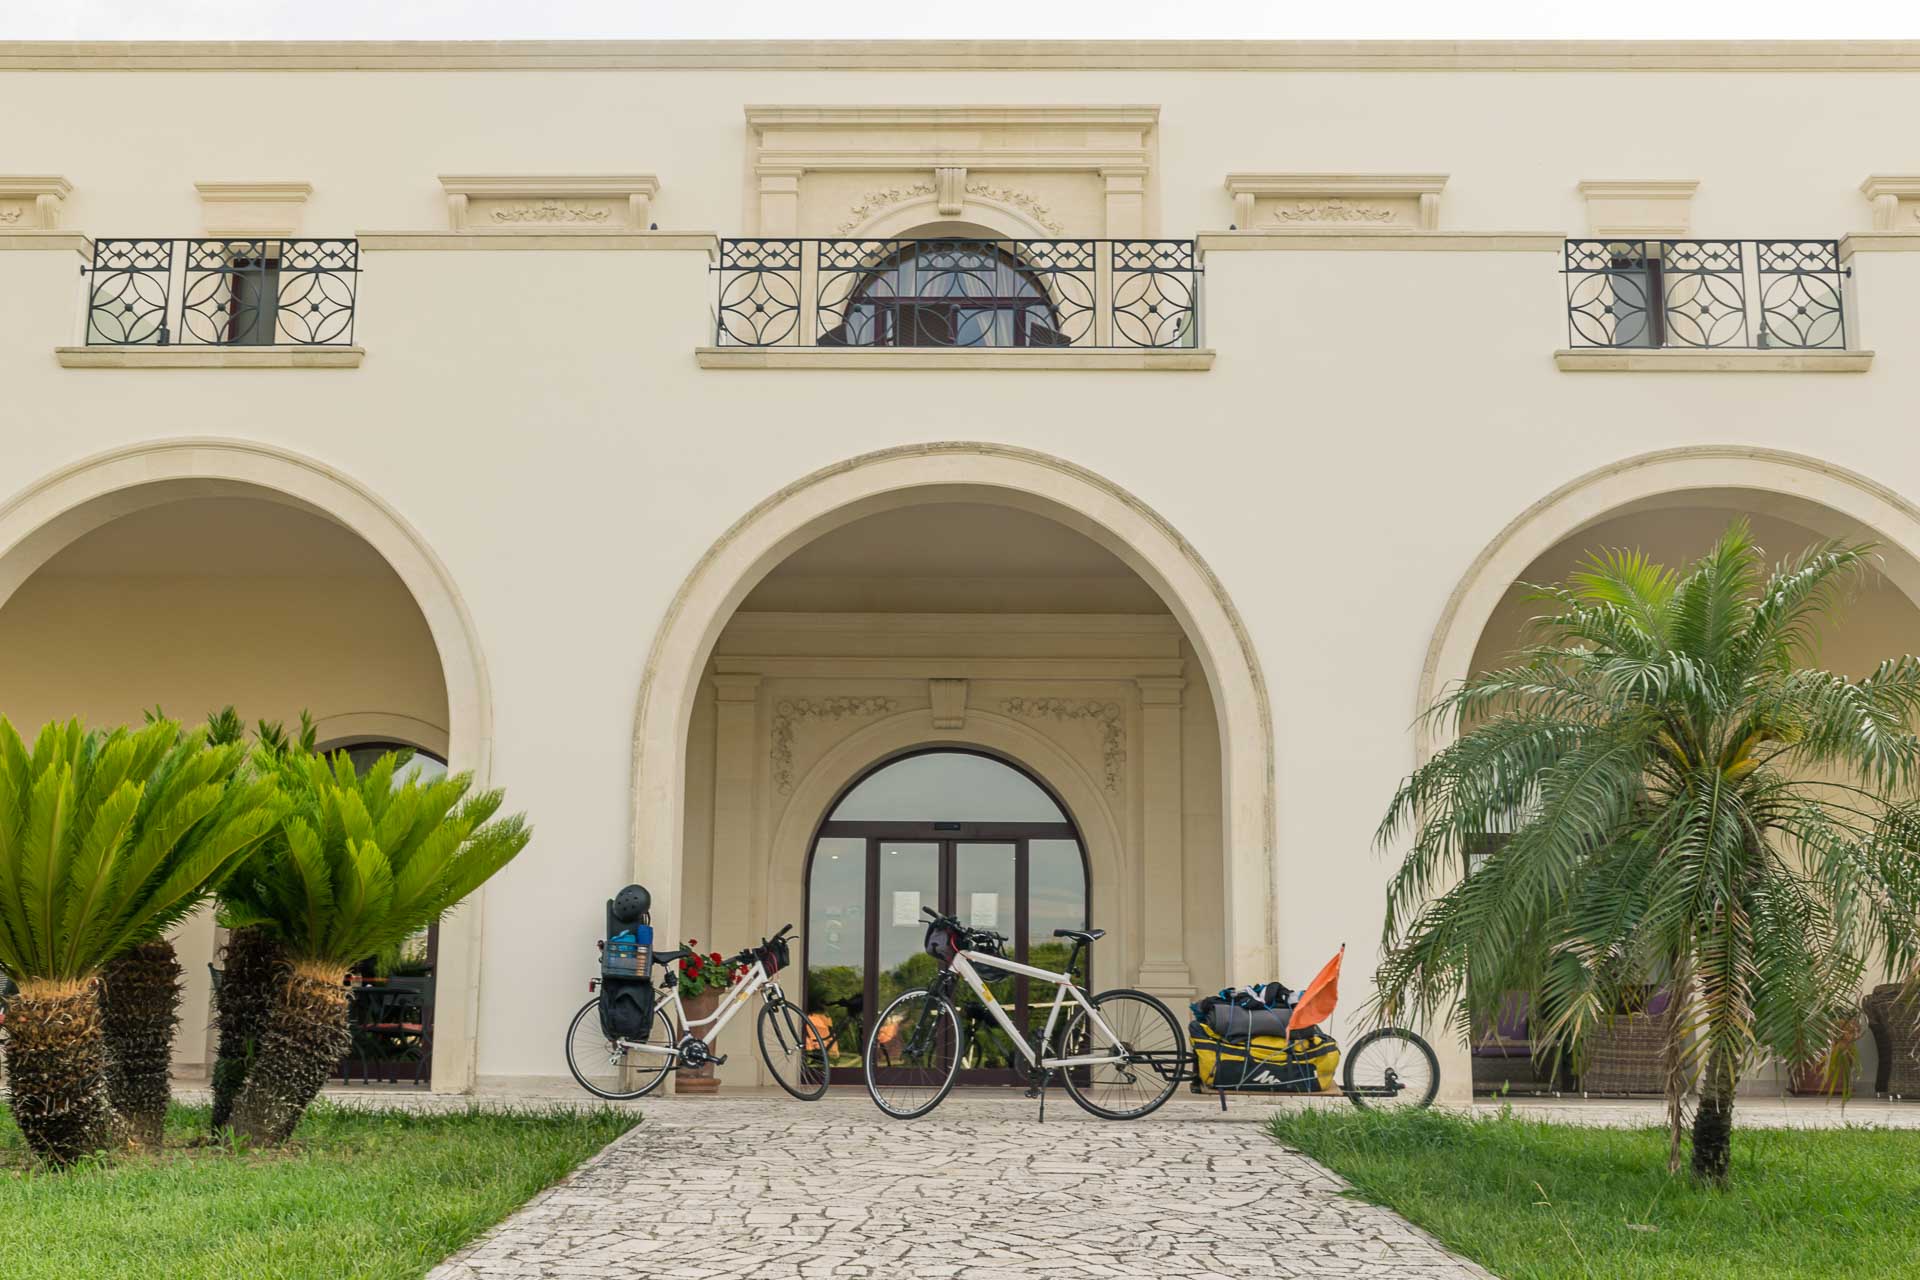 The entrance of the Masseria in Puglia with two bikes parked in the front of a large arch